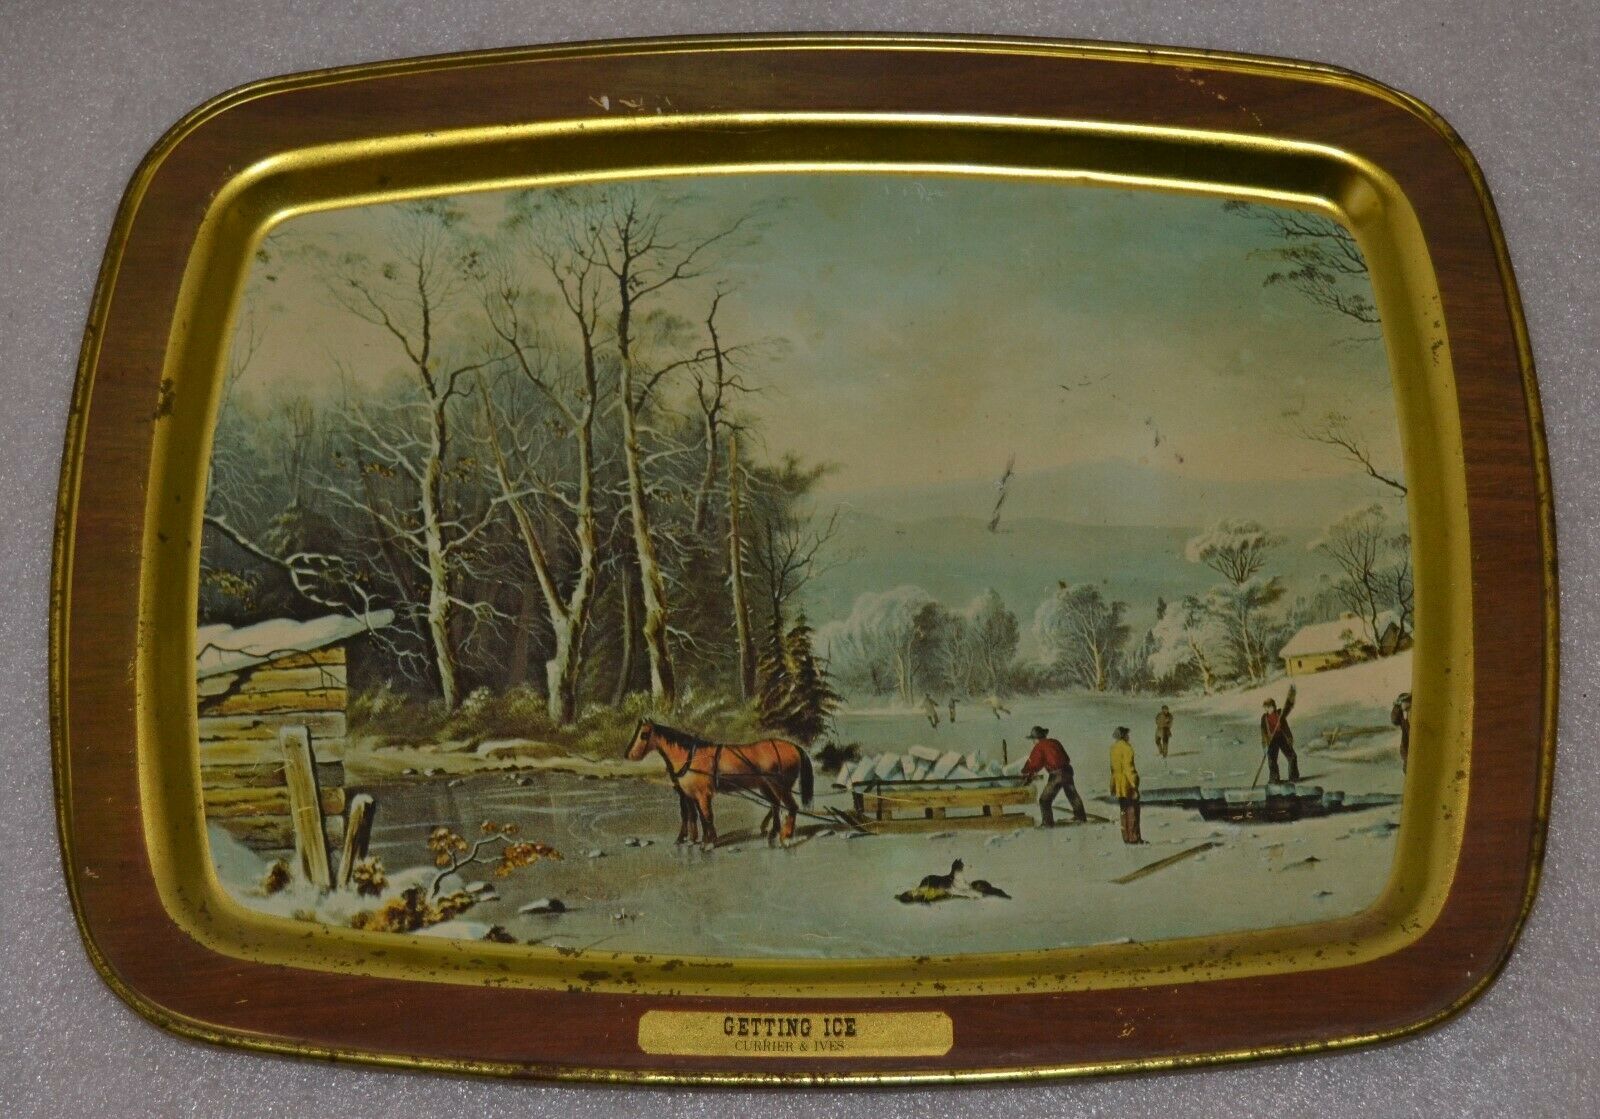 CURRIER AND IVES "GETTING ICE" SERVING TRAY - $23.36